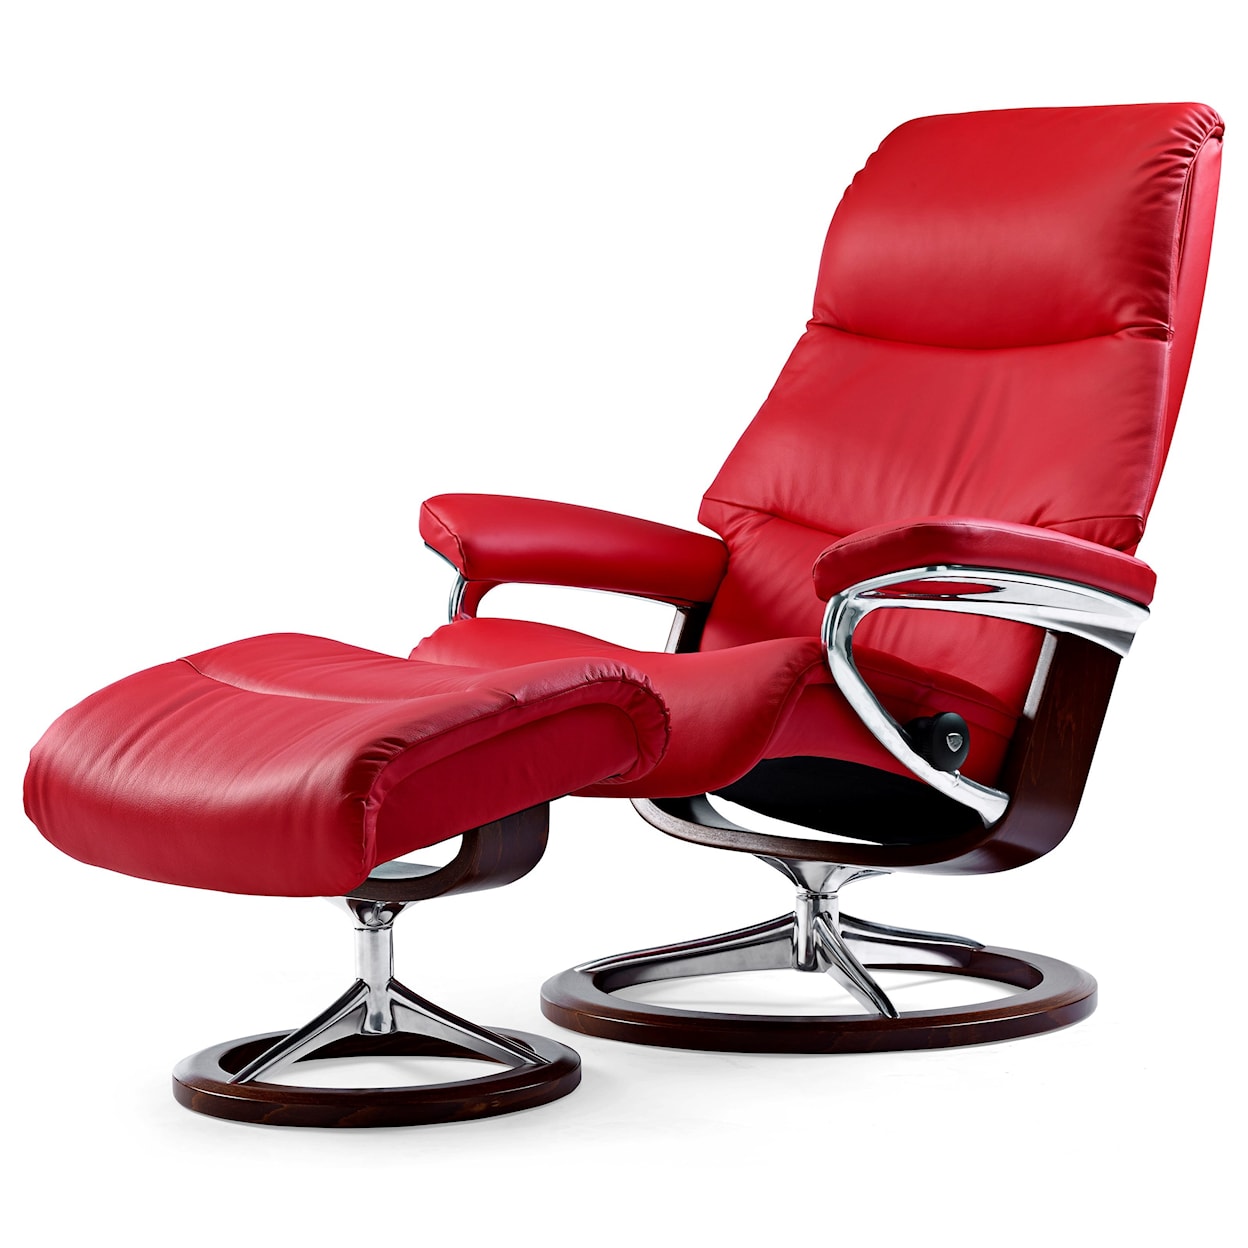 Stressless by Ekornes View Small Chair & Ottoman with Signature Base